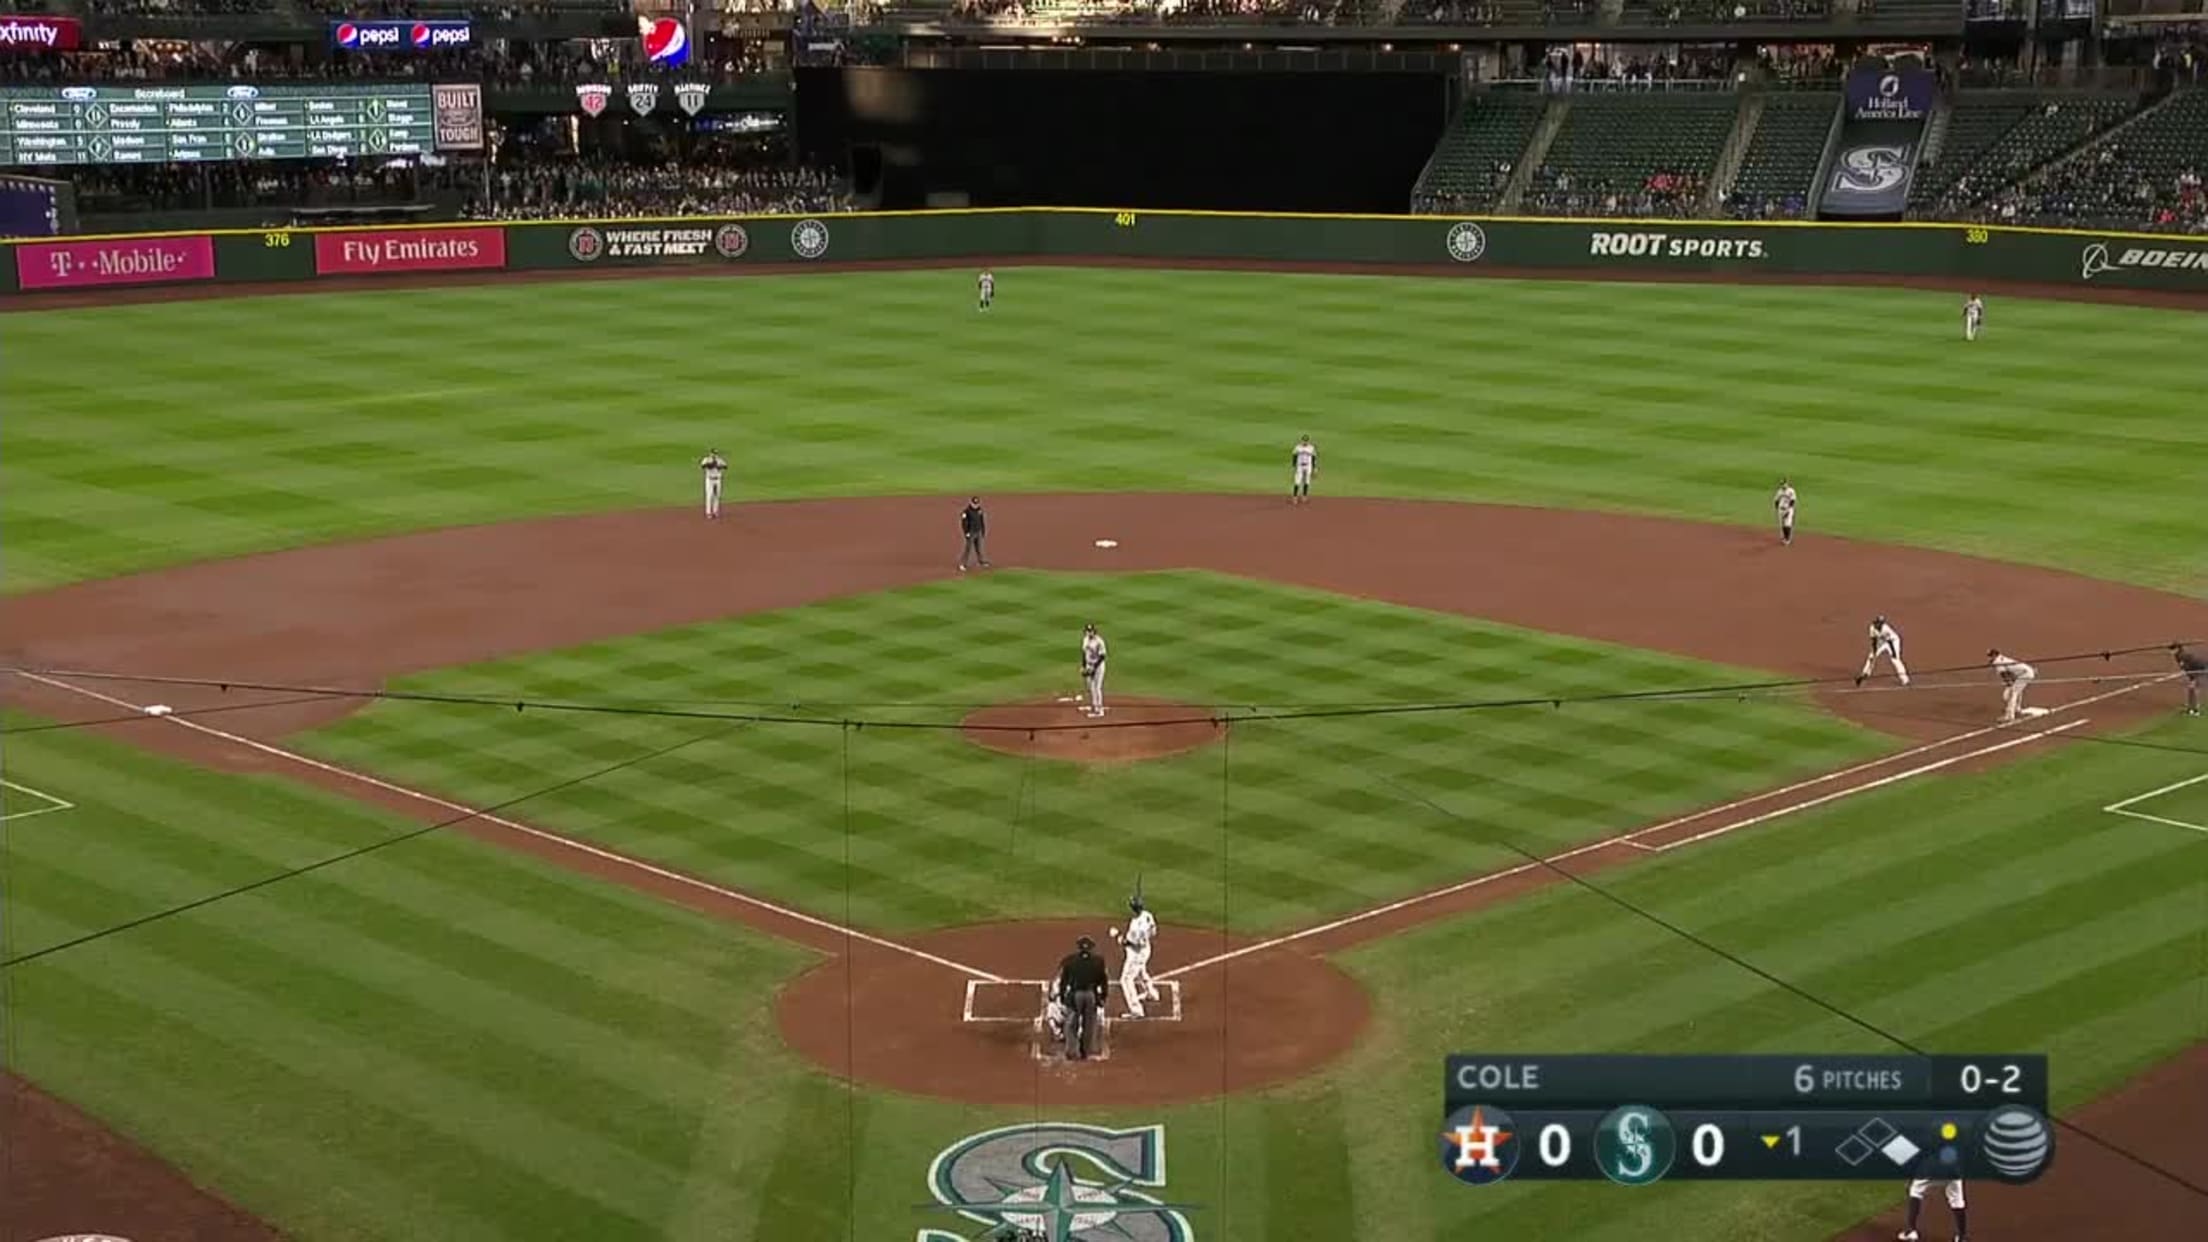 Gerrit Cole Ball In Dirt to Robinson Cano, 04/18/2018